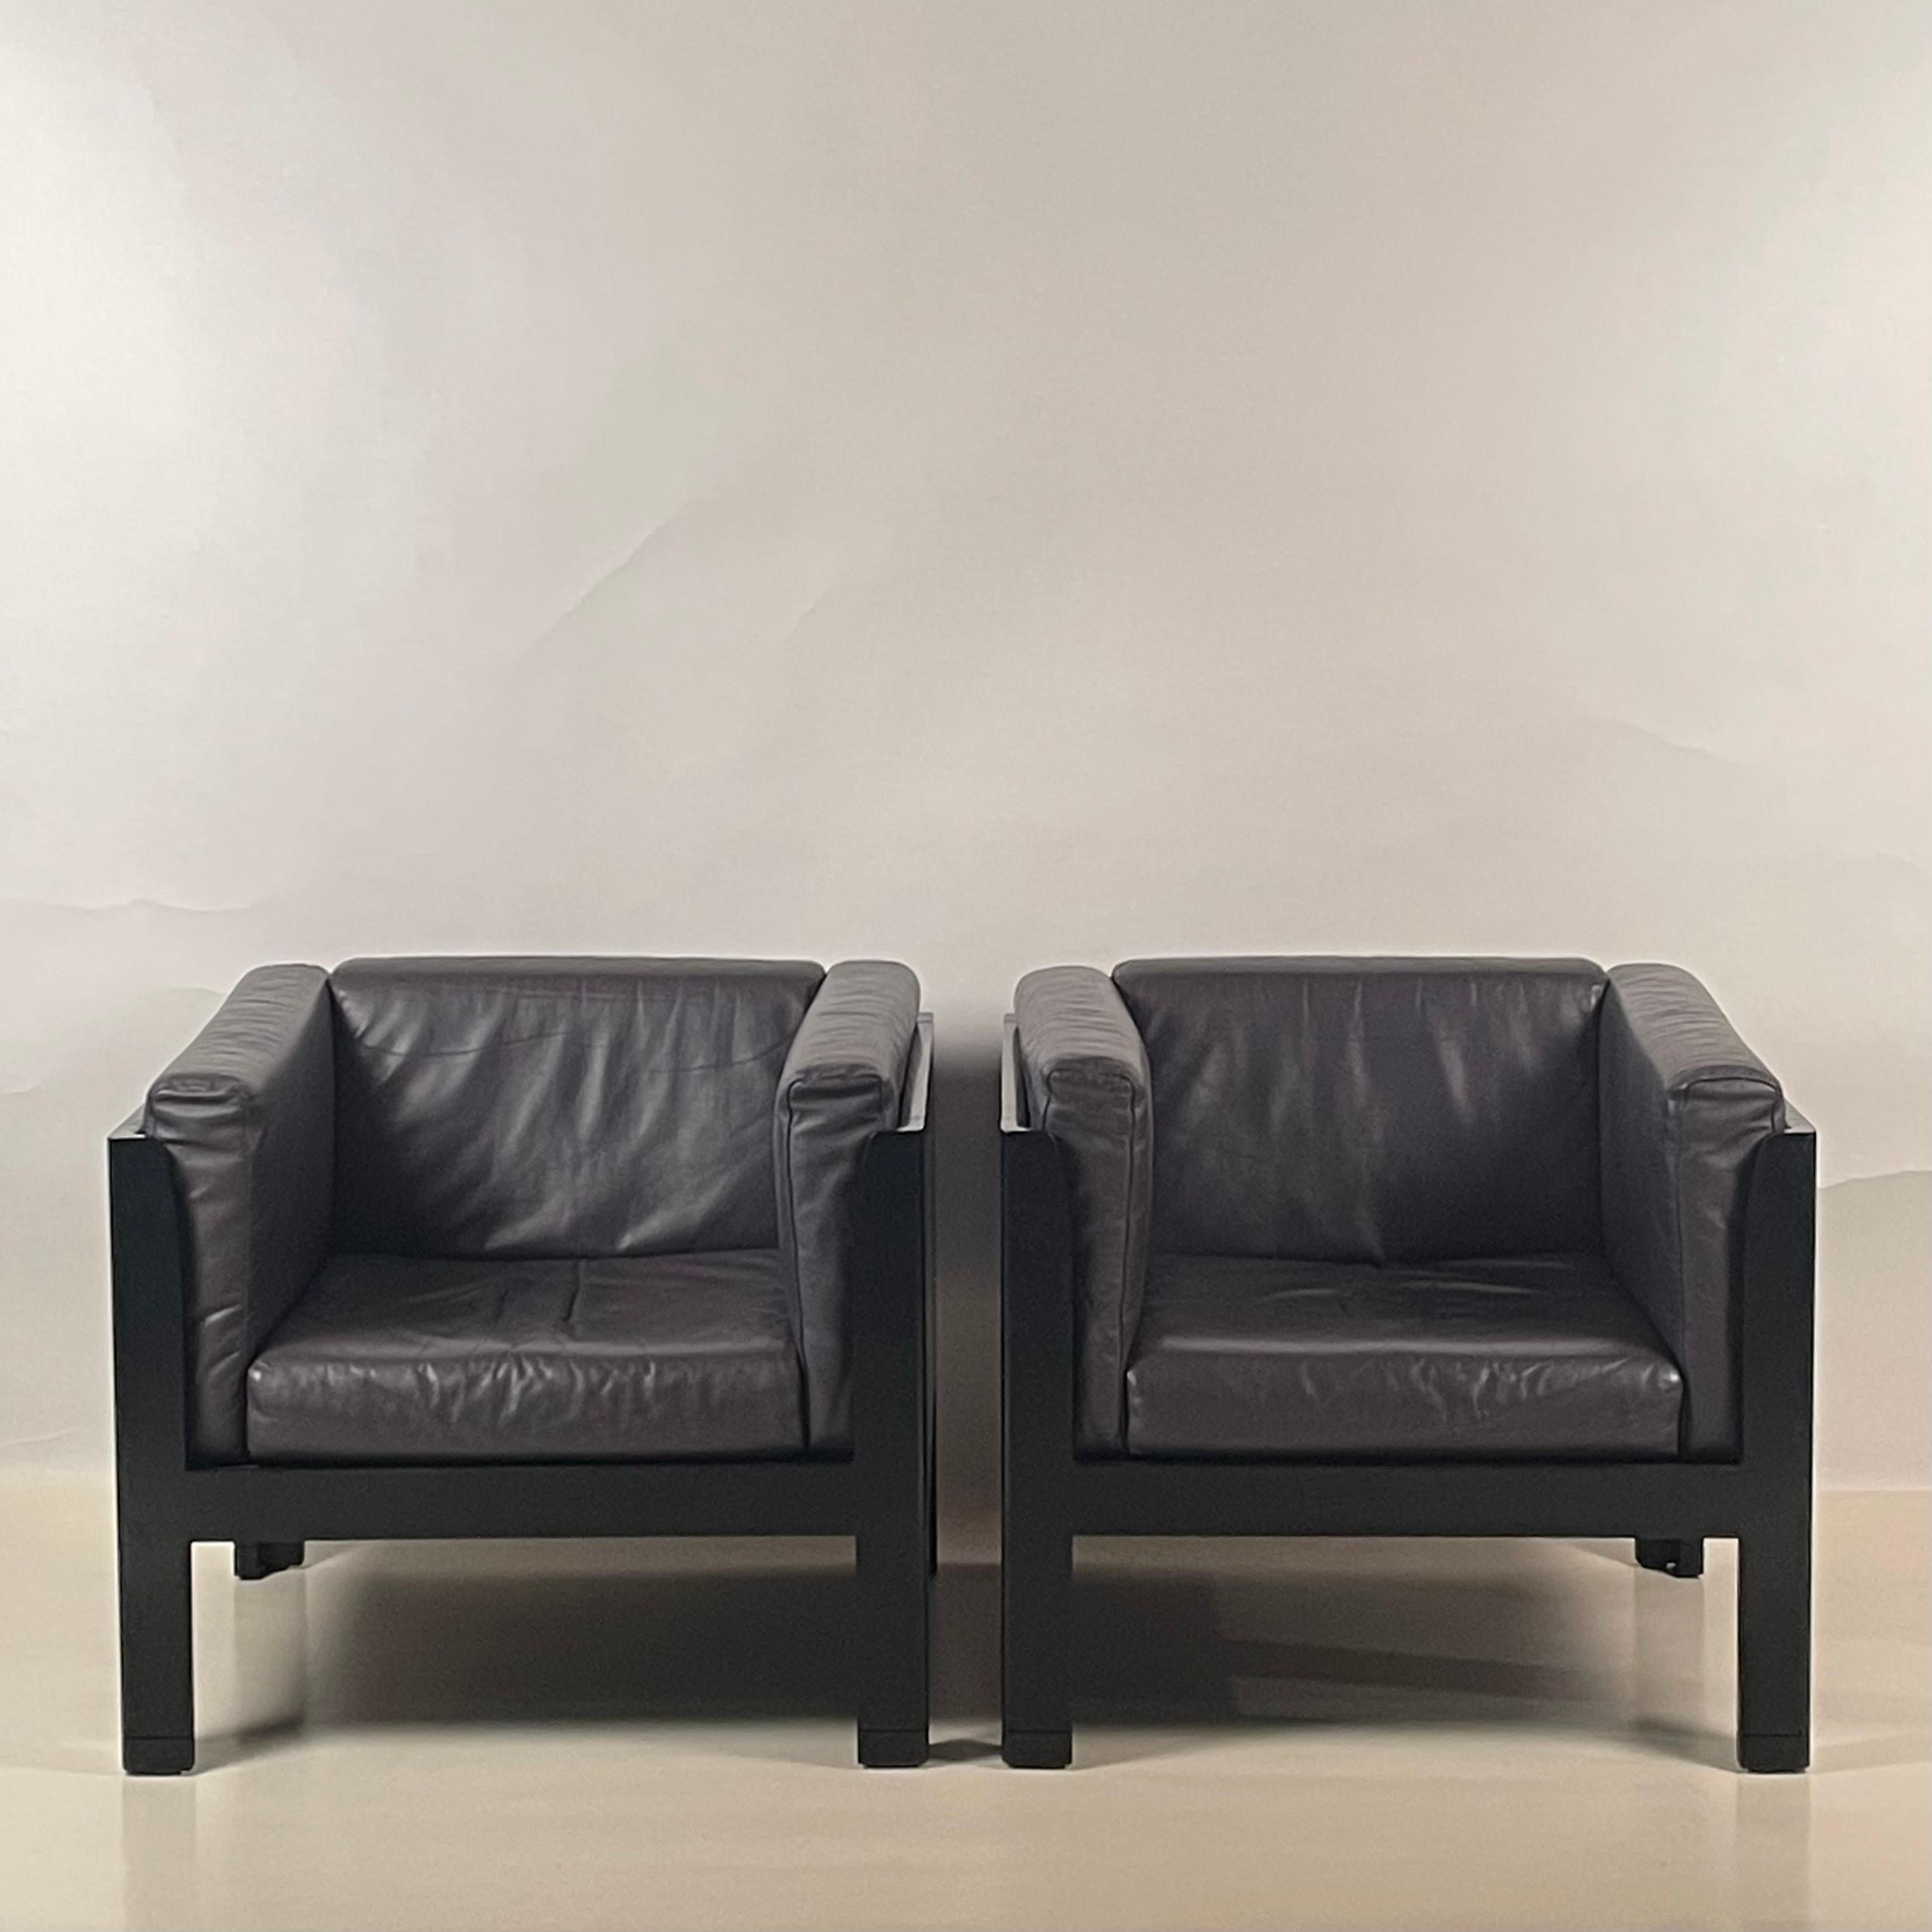 American Rare Pair of Post-Modern Ebonized Oak and Leather Club Chairs by Brian Kane For Sale